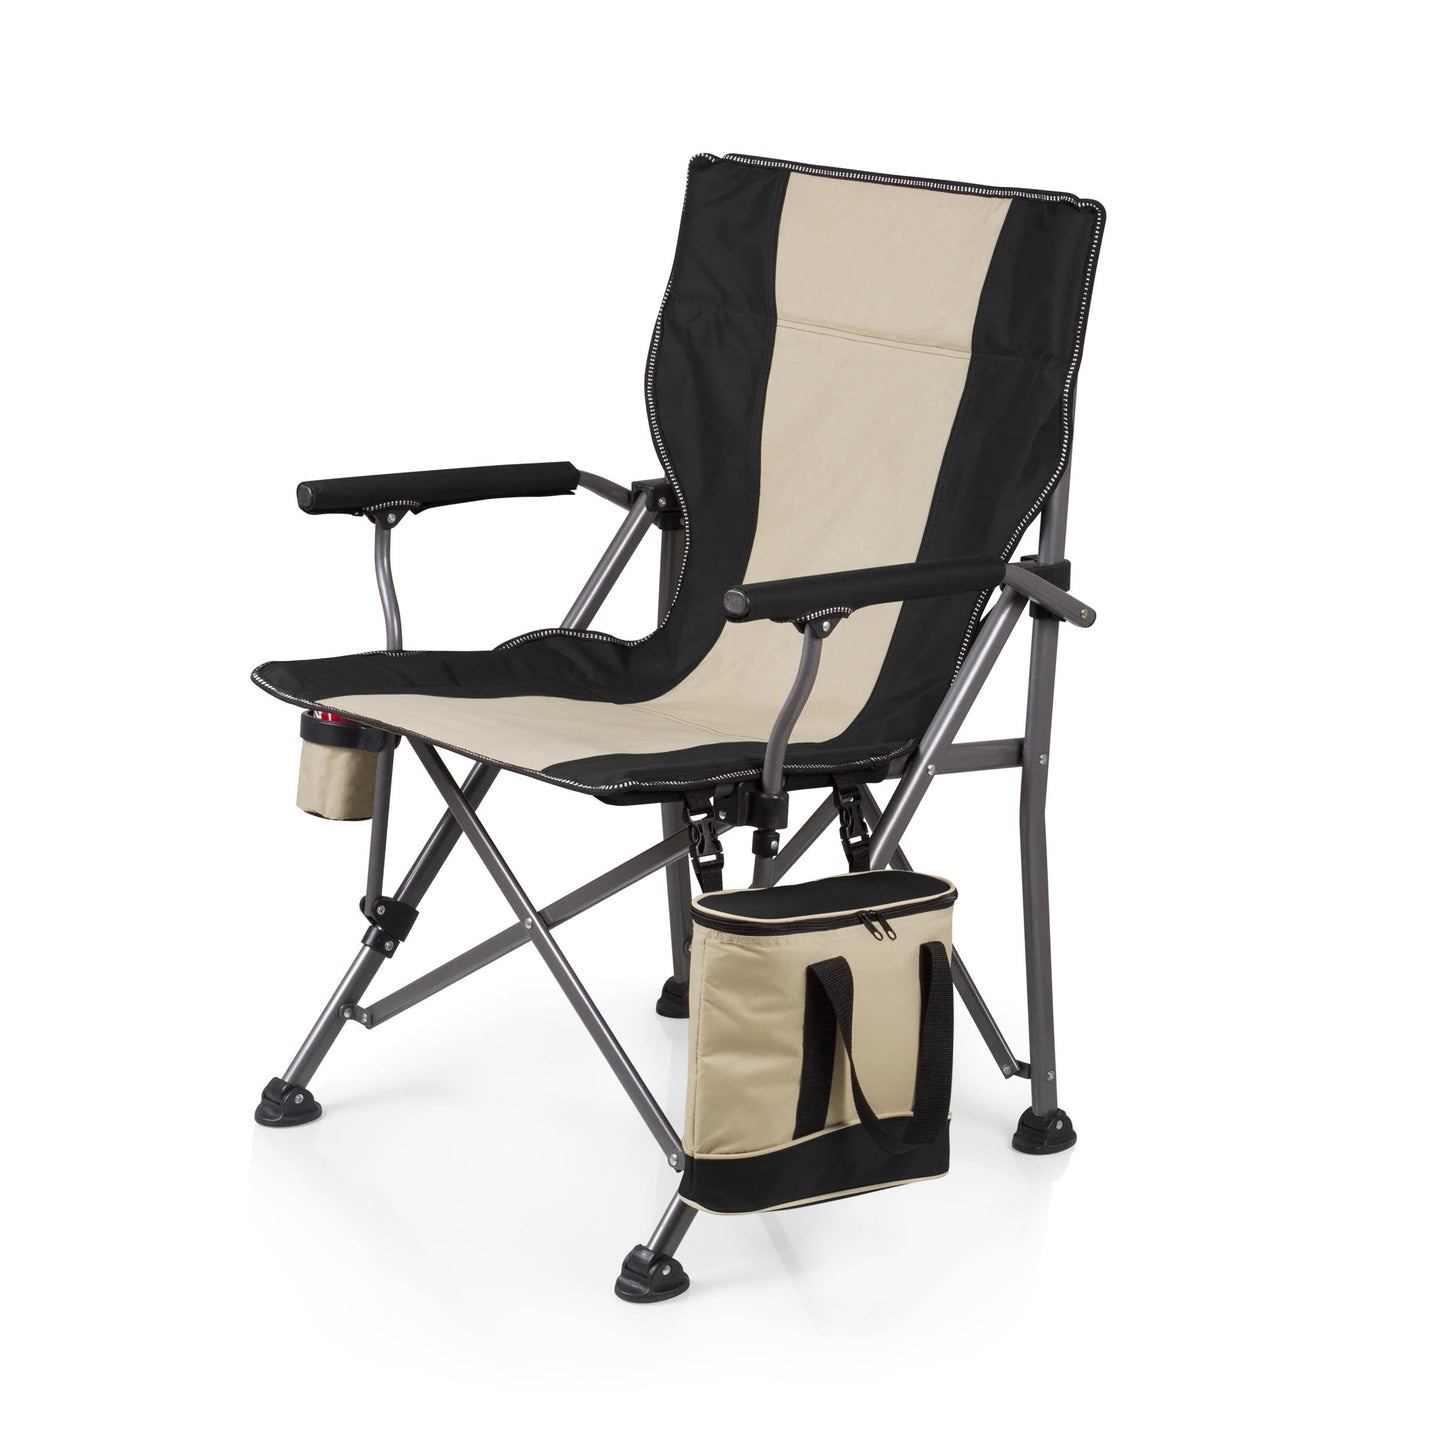 Tampa Bay Buccaneers - Outlander Folding Camping Chair with Cooler